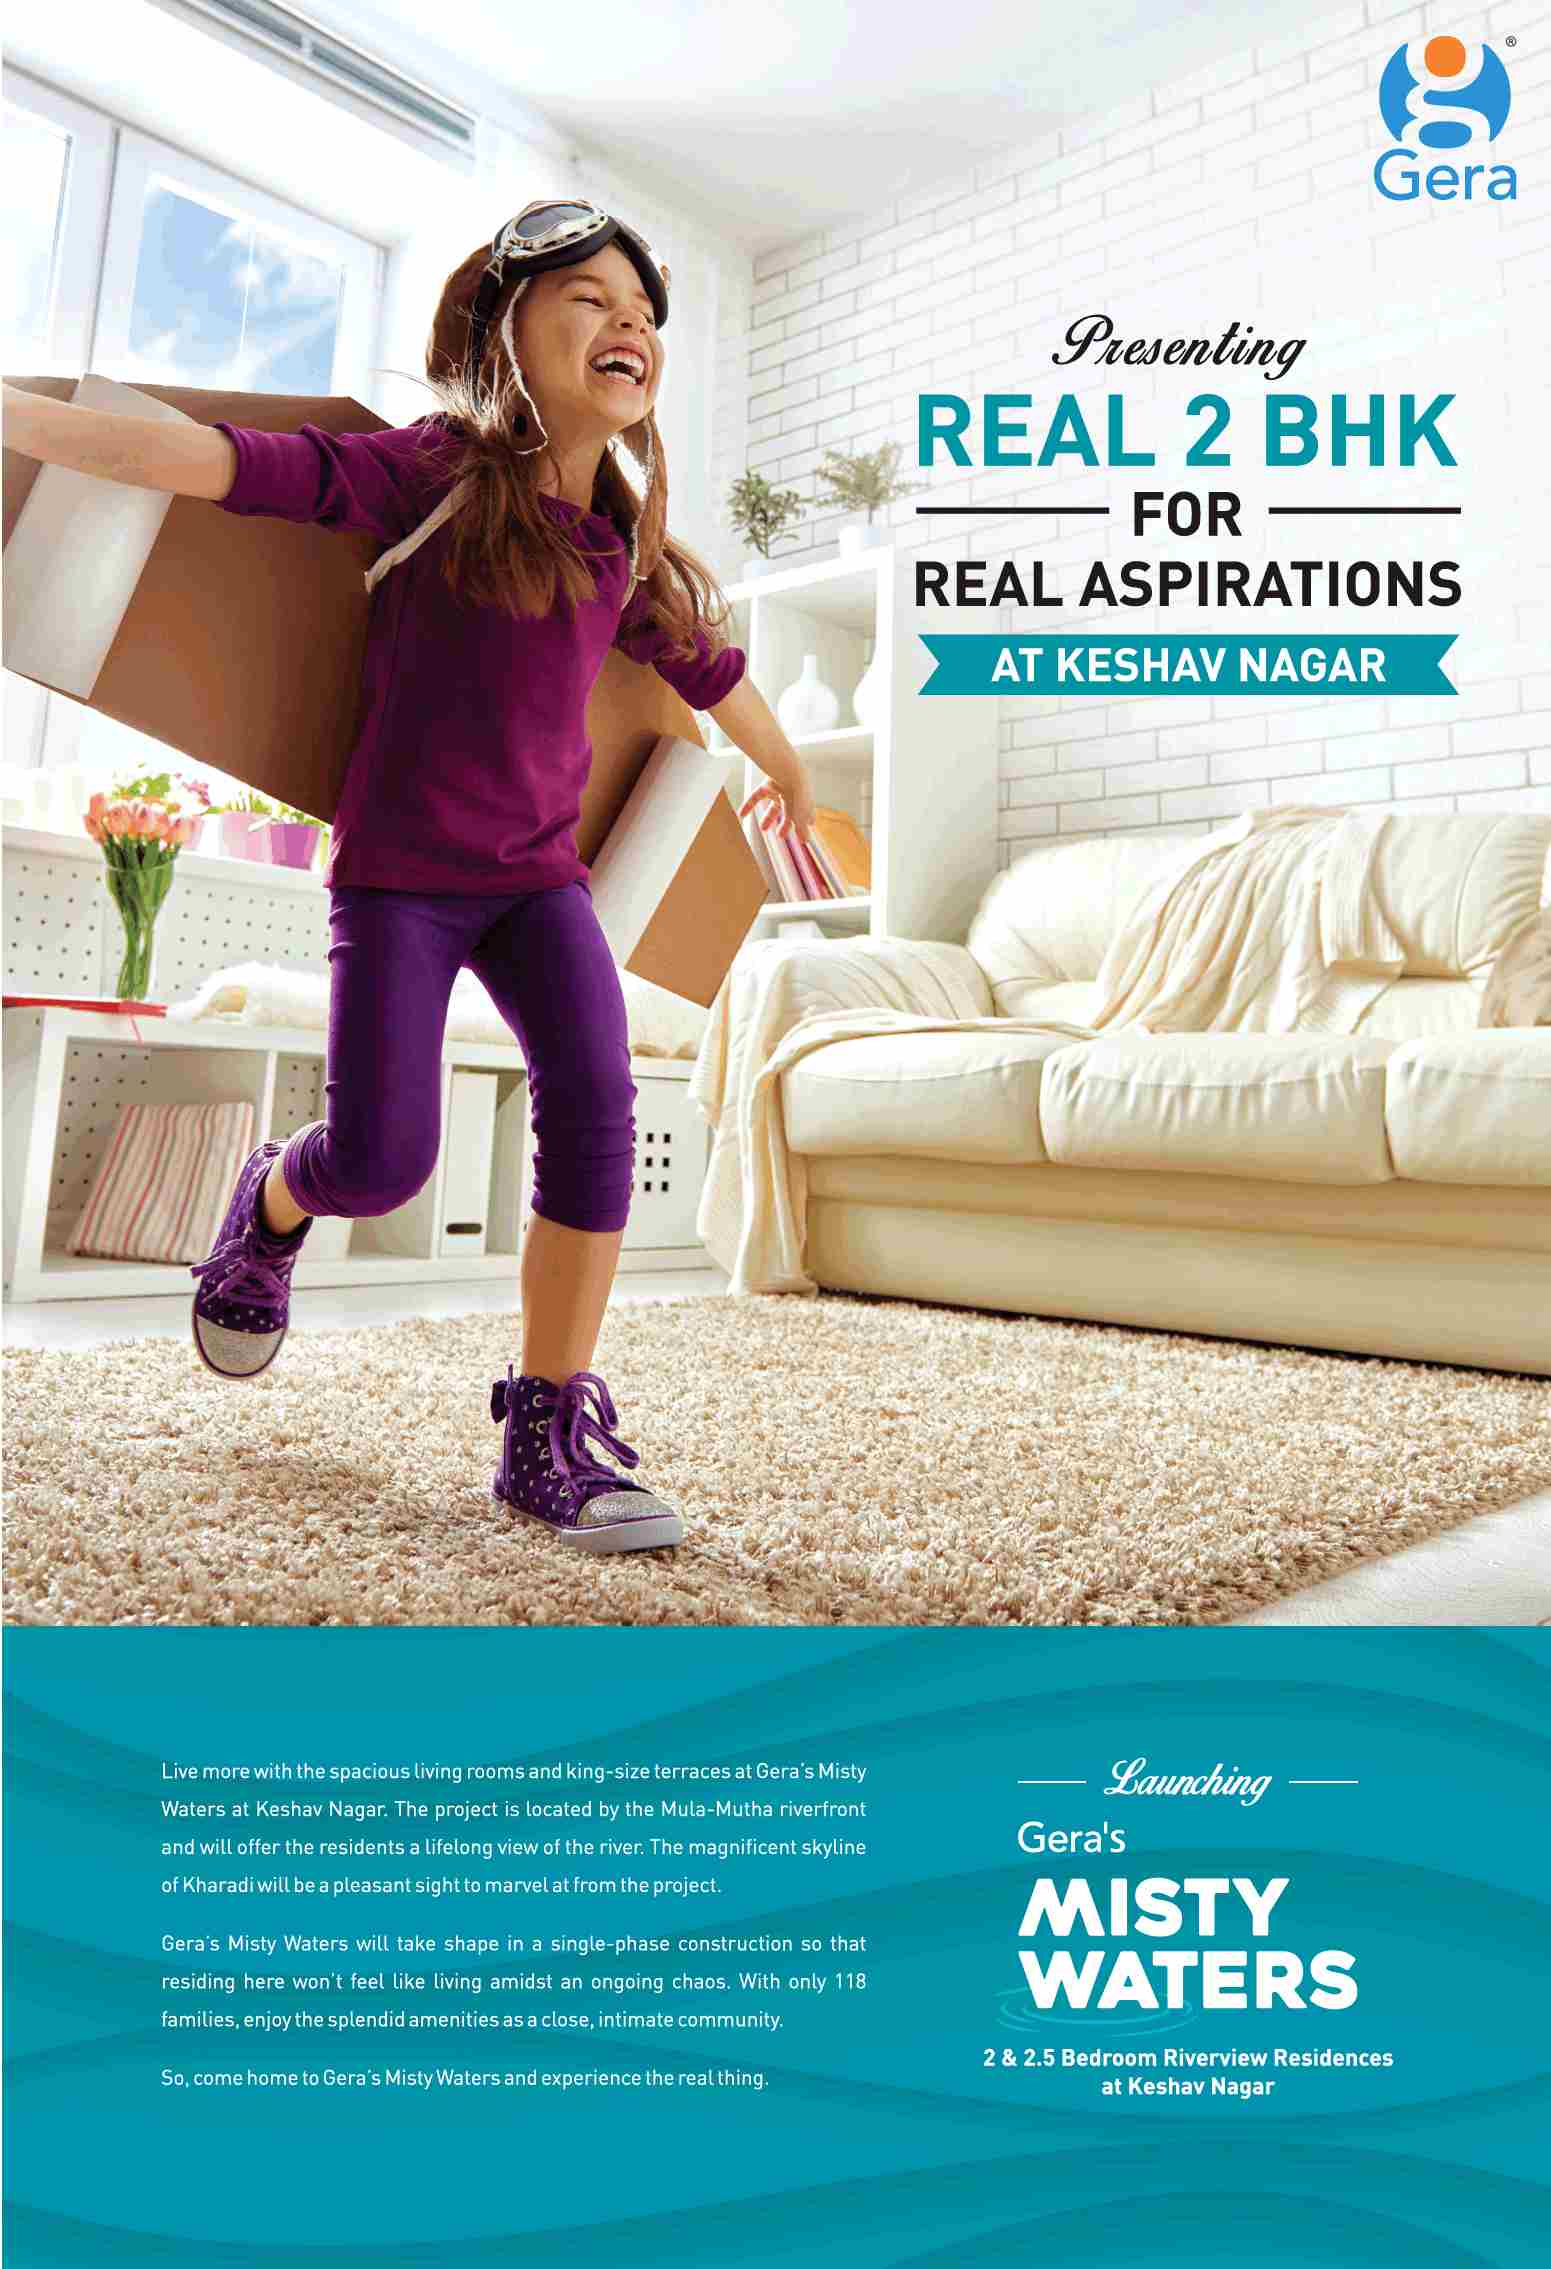 Live more with the spacious living rooms and king-size terraces at Gera Misty Waters in Pune Update